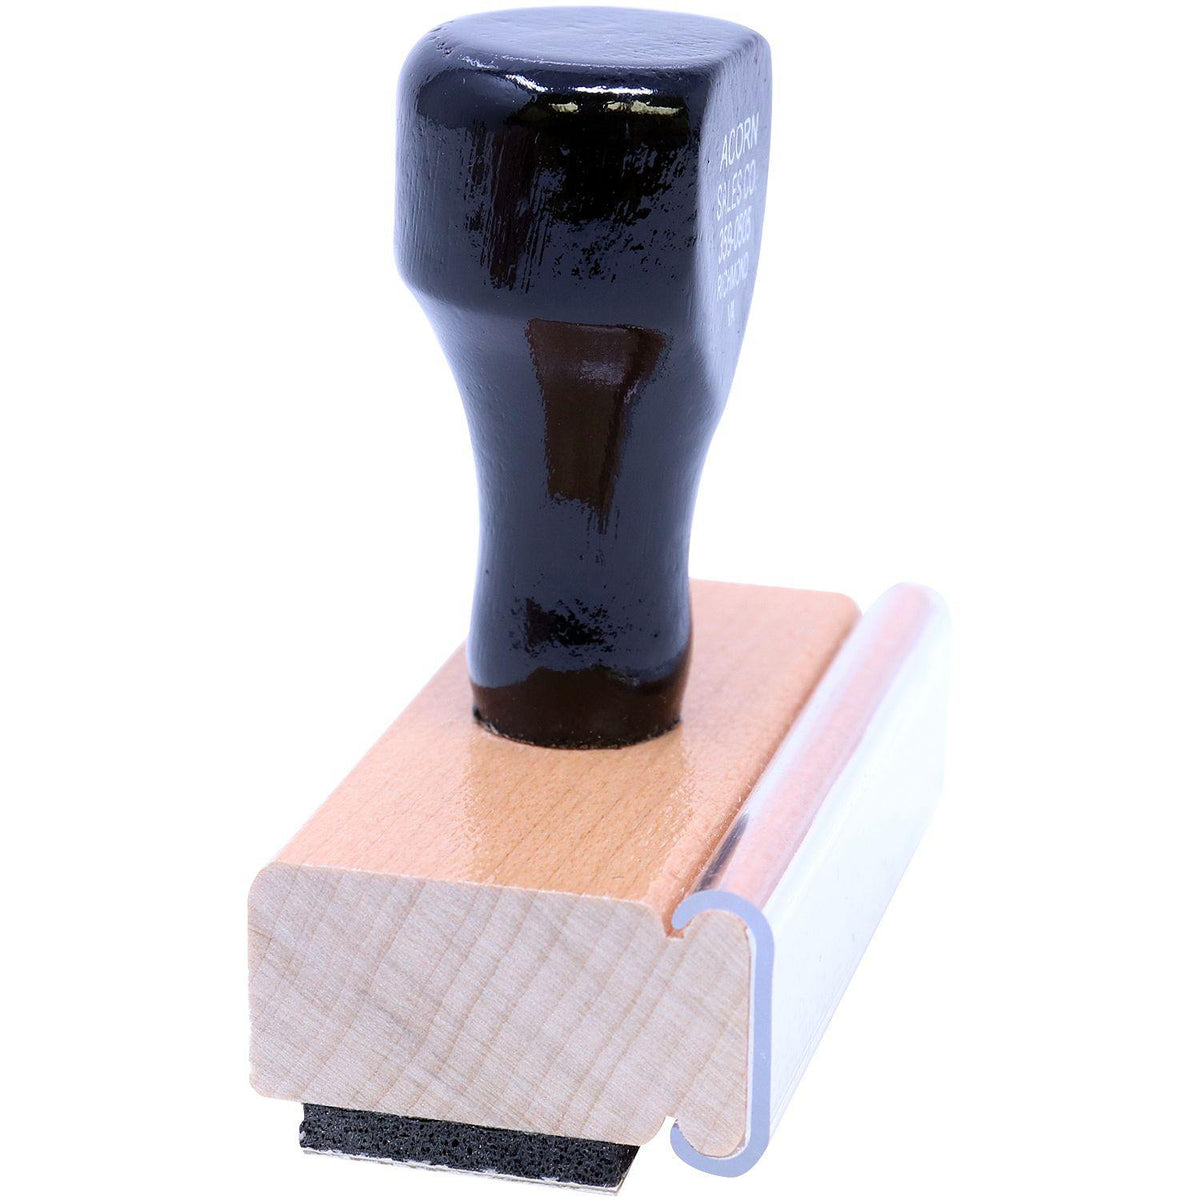 Side View of Large Outline Pagado Rubber Stamp at an Angle